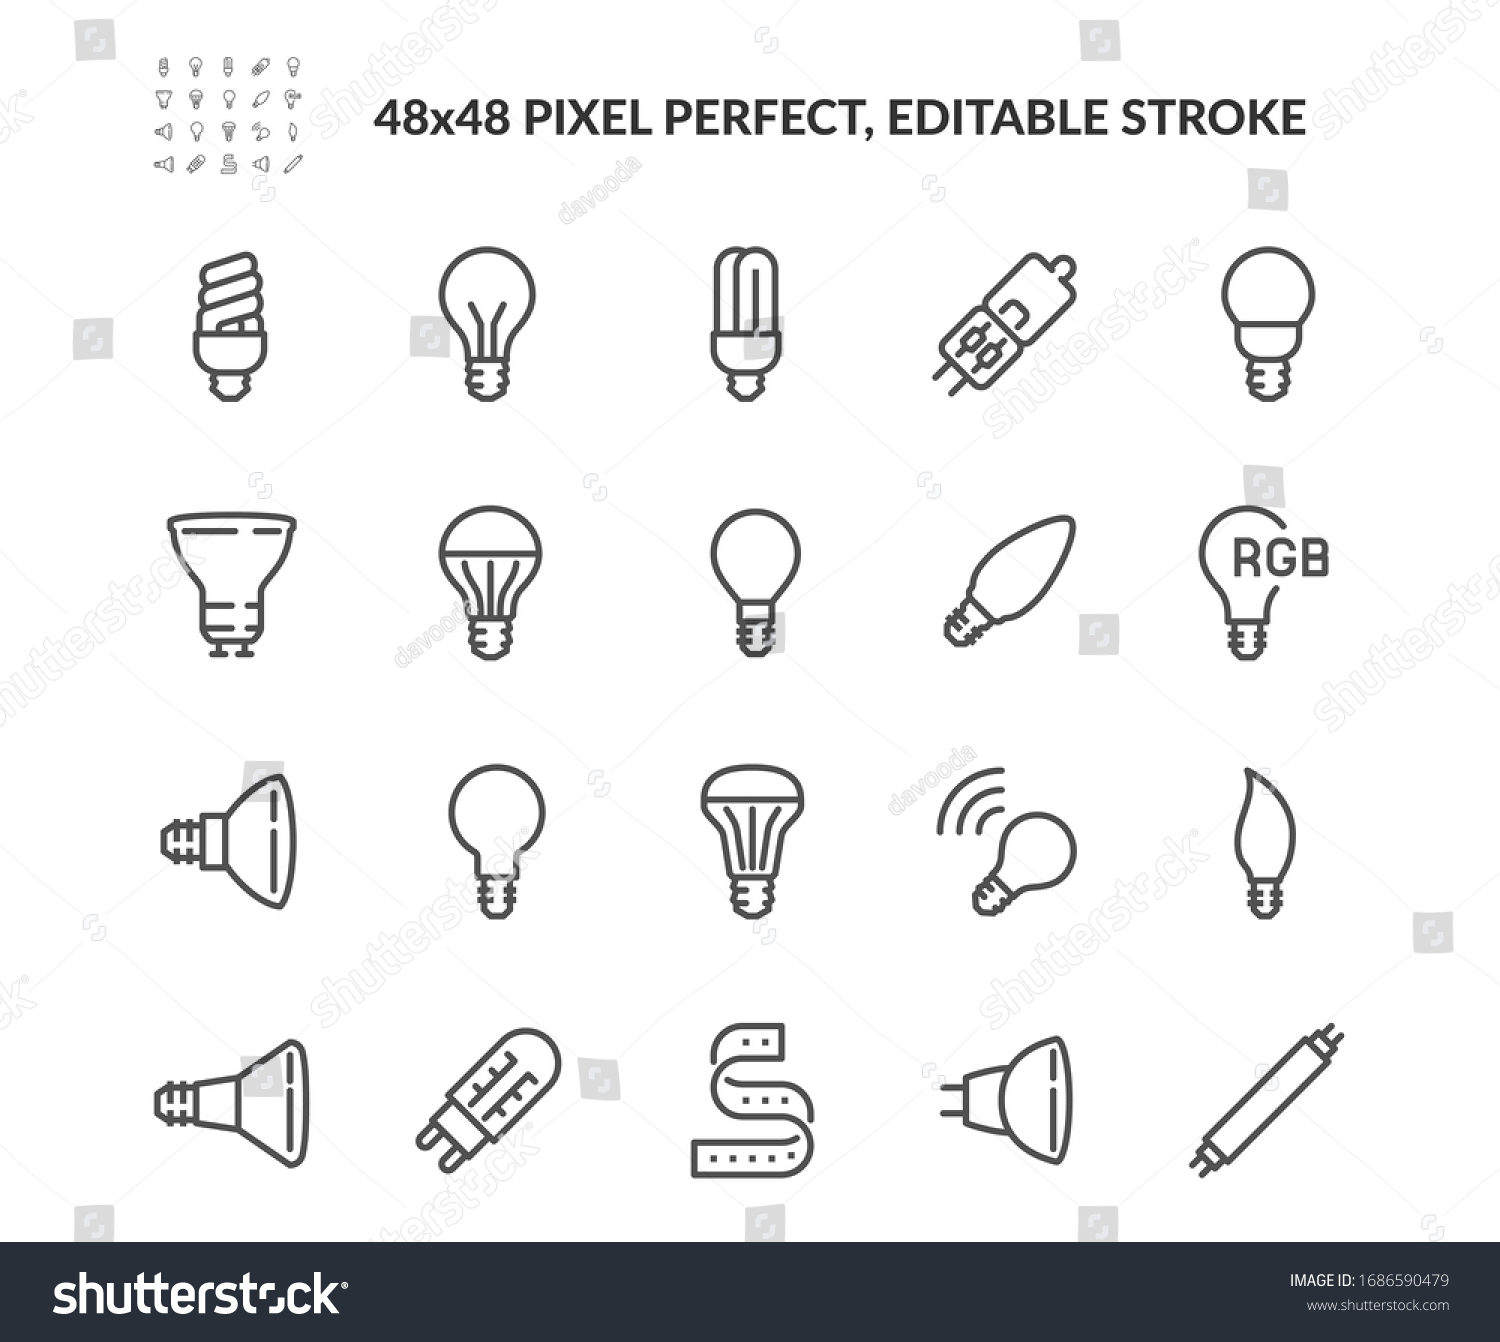 Simple Set of Light Bulb Related Vector Line Icons. Contains such Icons as RBG stripe, Classic Lamp, Halogen Tube and more. Editable Stroke. 48x48 Pixel Perfect. #1686590479